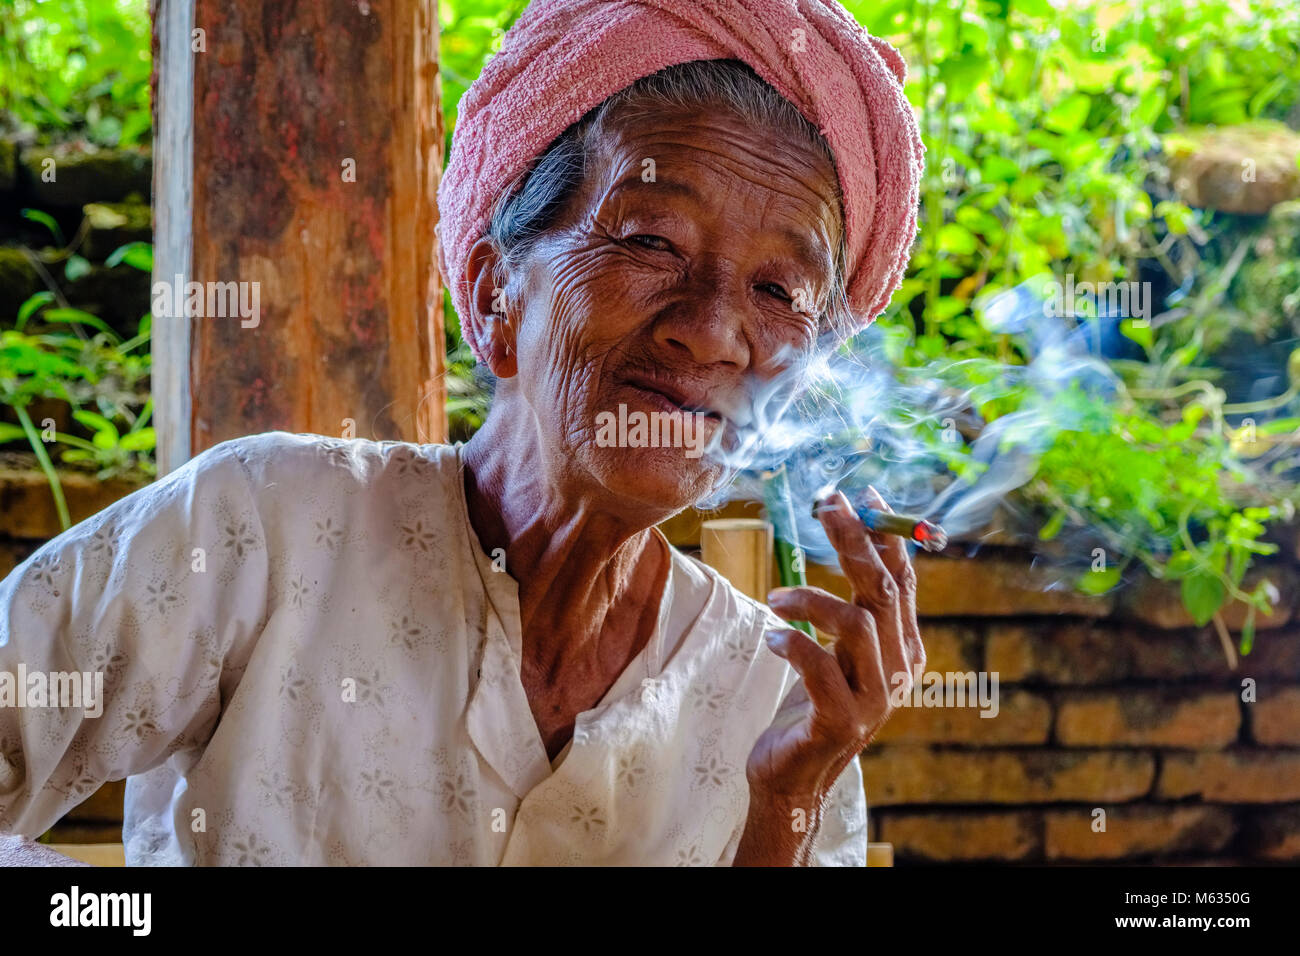 100 year old woman smoking clipart